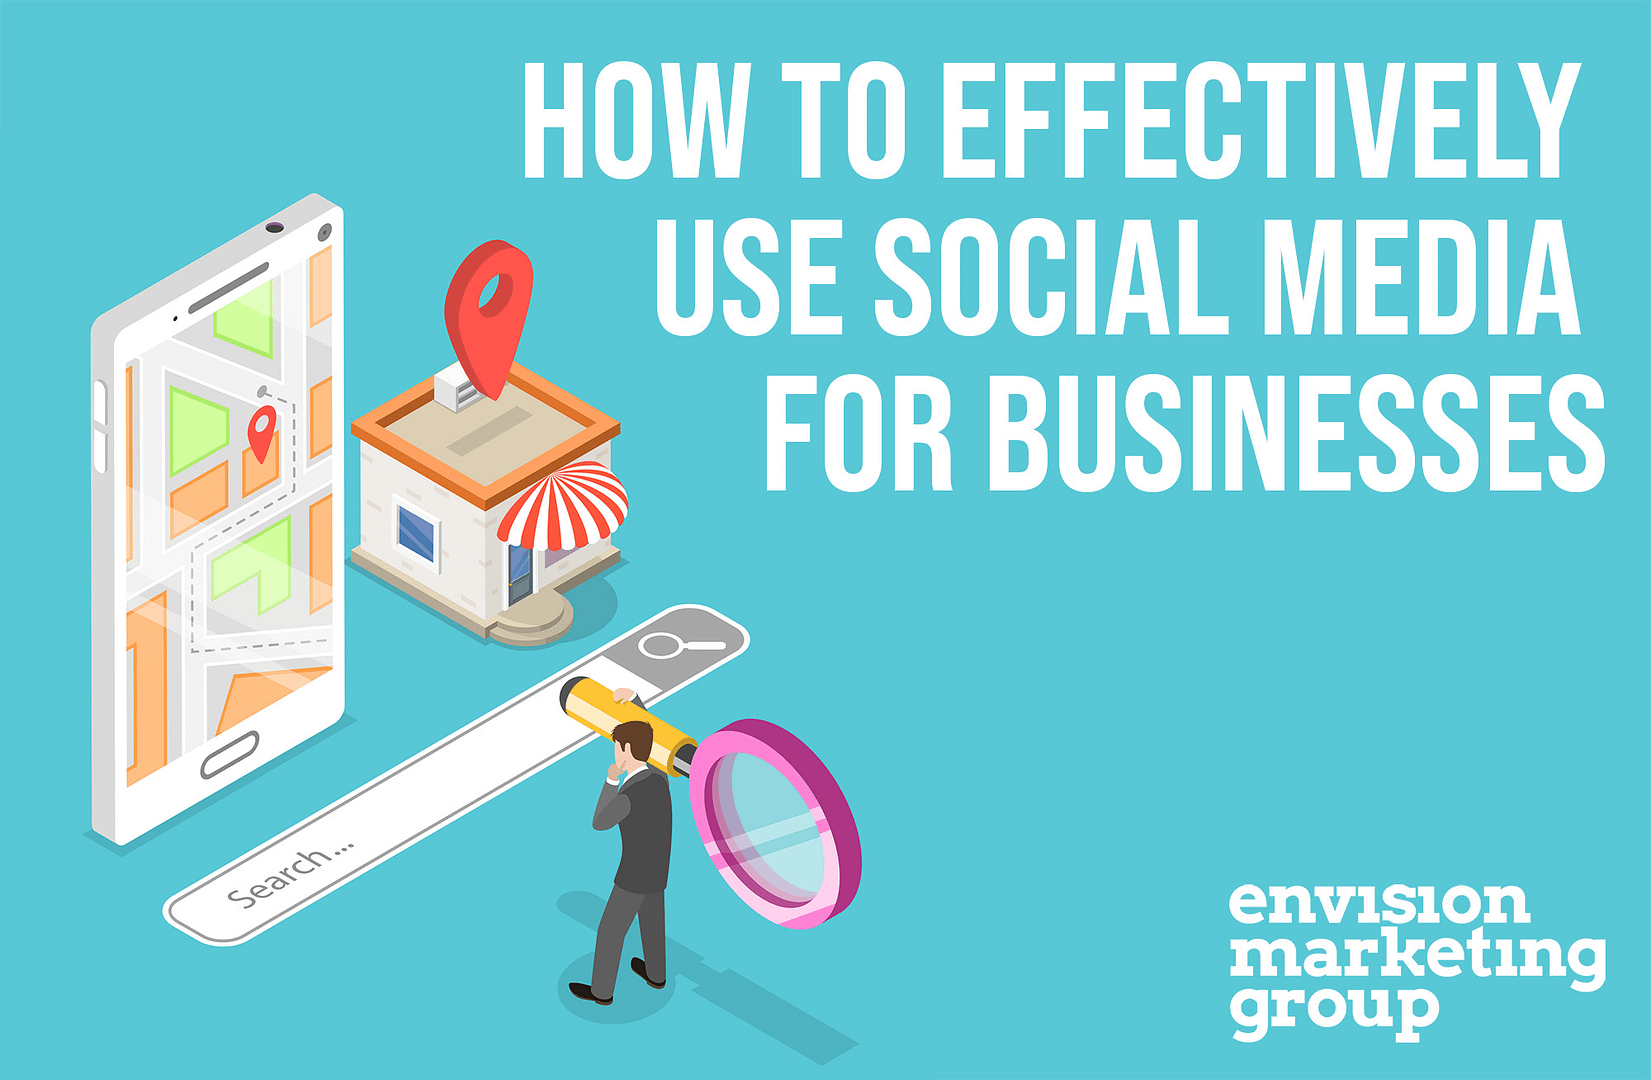 How to Effectively Use Social Media for Businesses by Envision Marketing Group